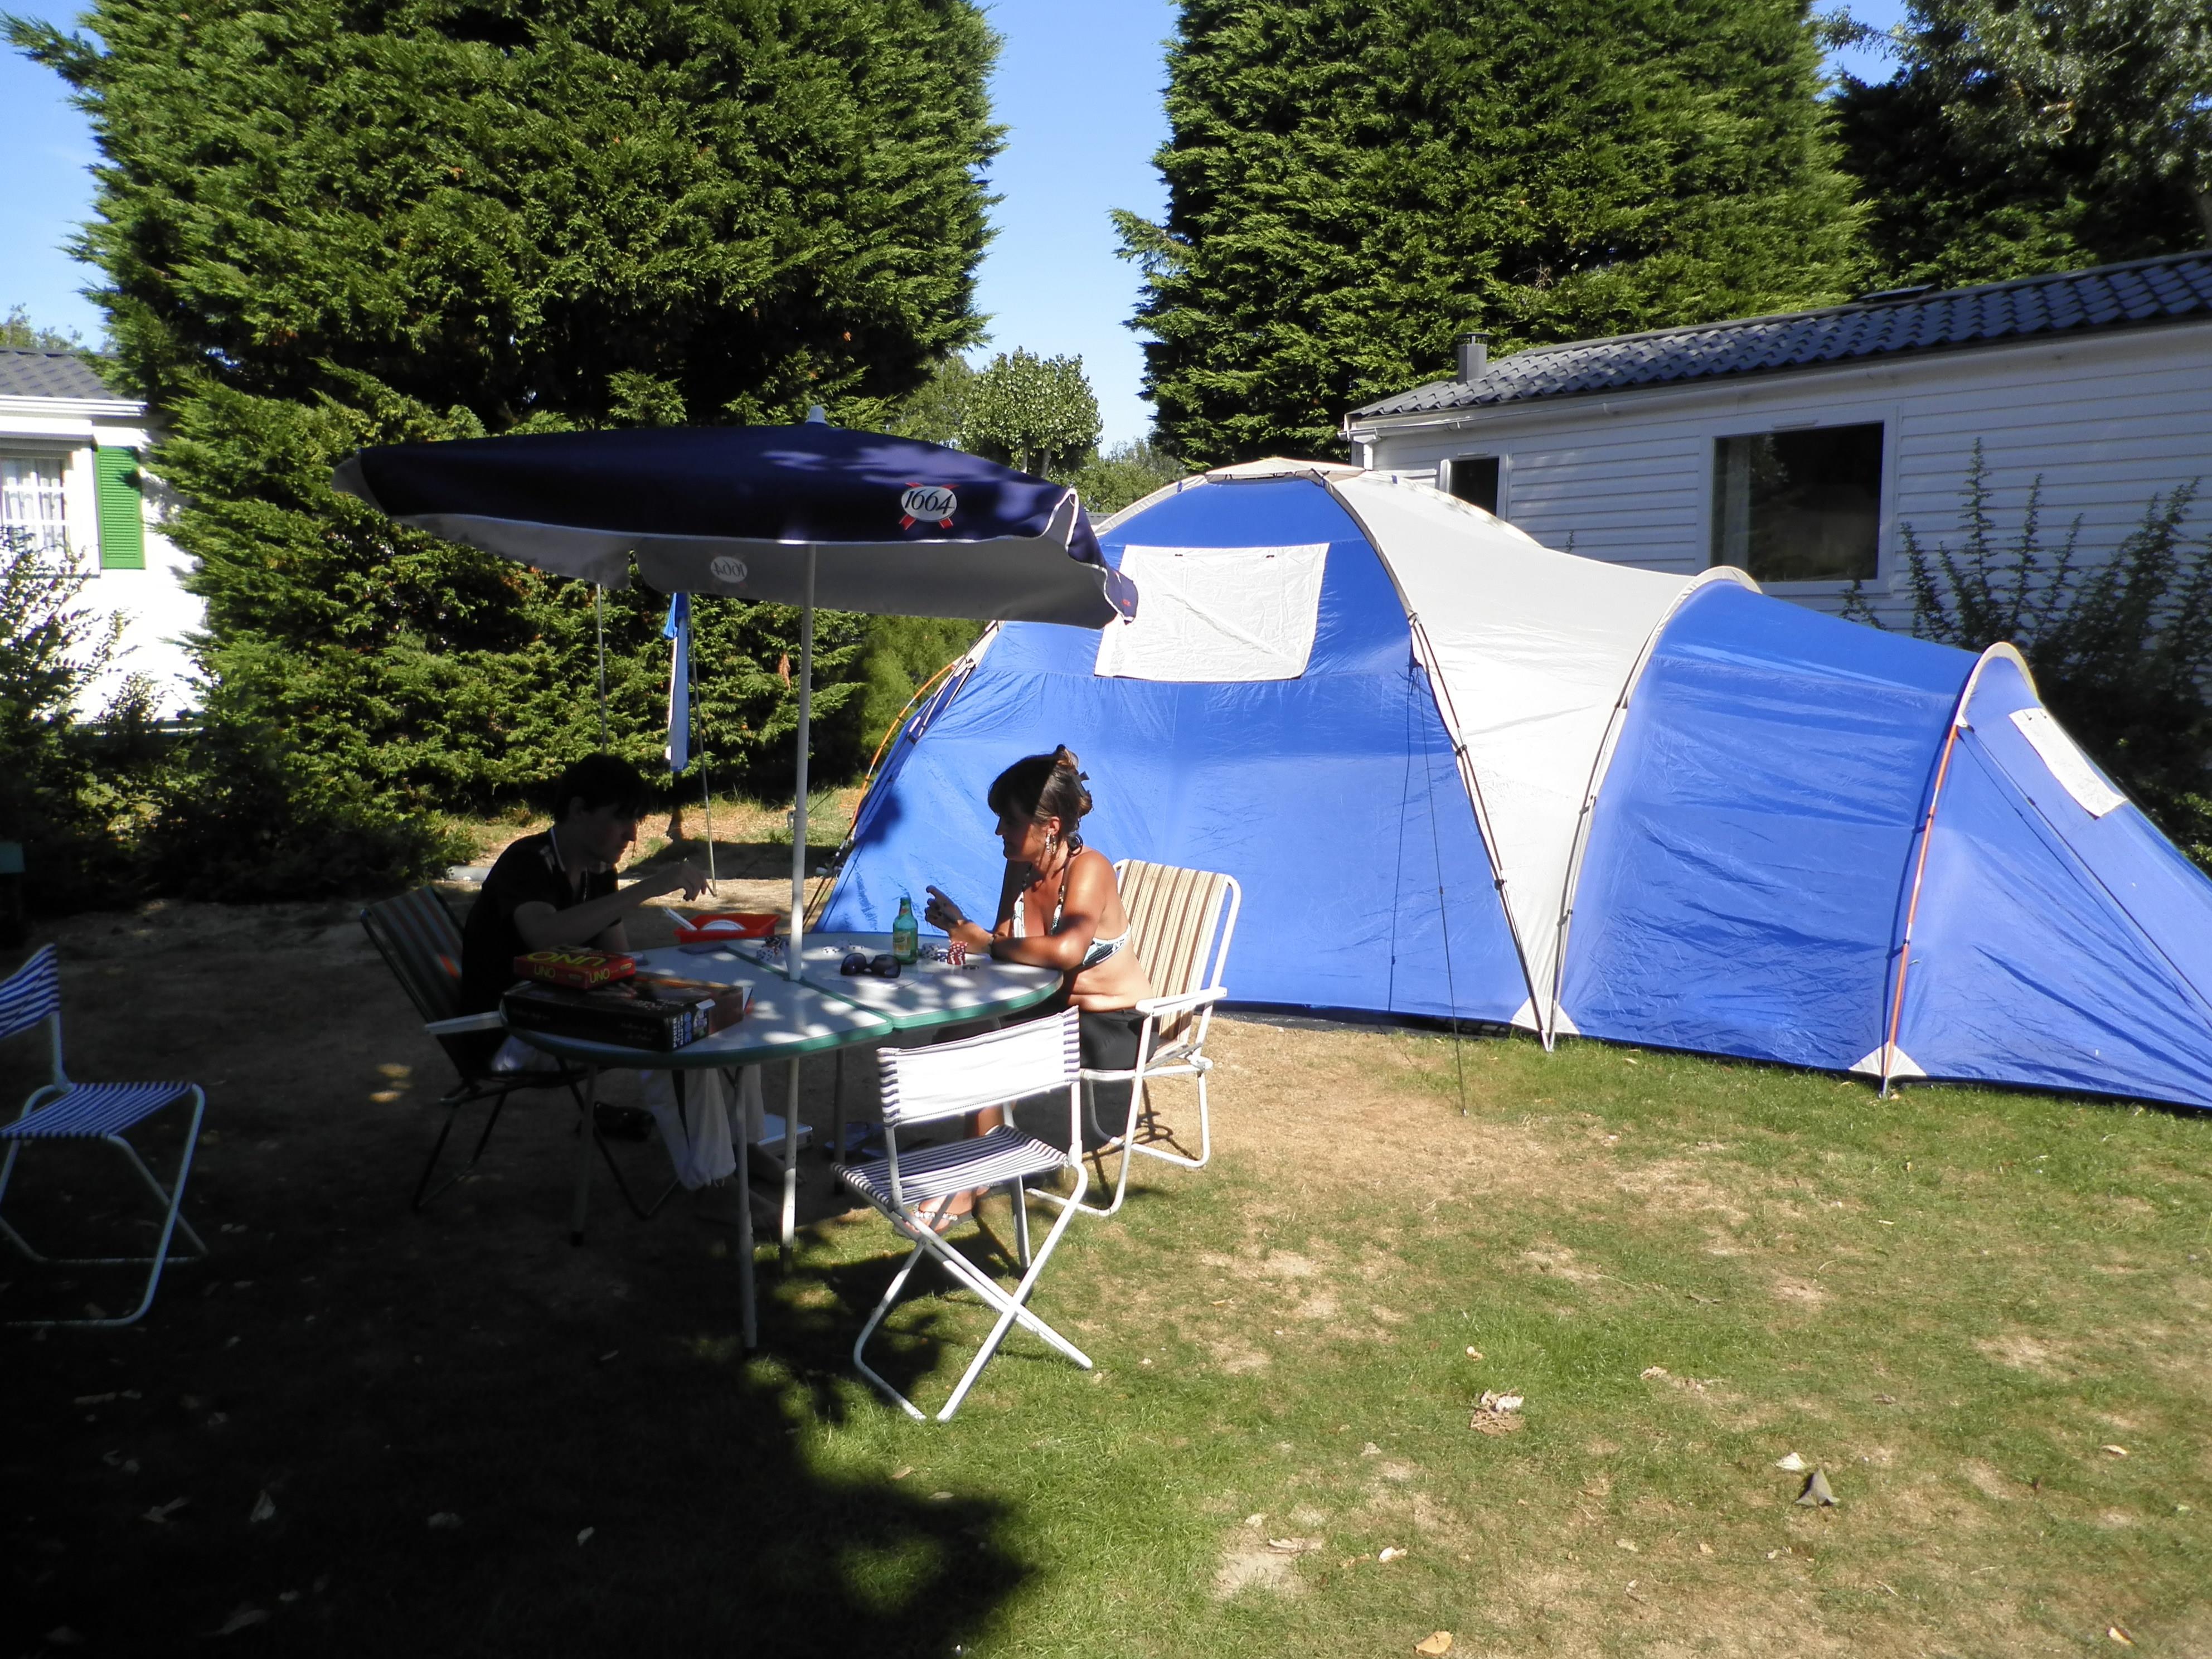 Pitch tent or trailer tent – 7.50 m  (water, electricity, 2 people and 1 vehicle) 1/2 Ppl. 1/2 Ppl.